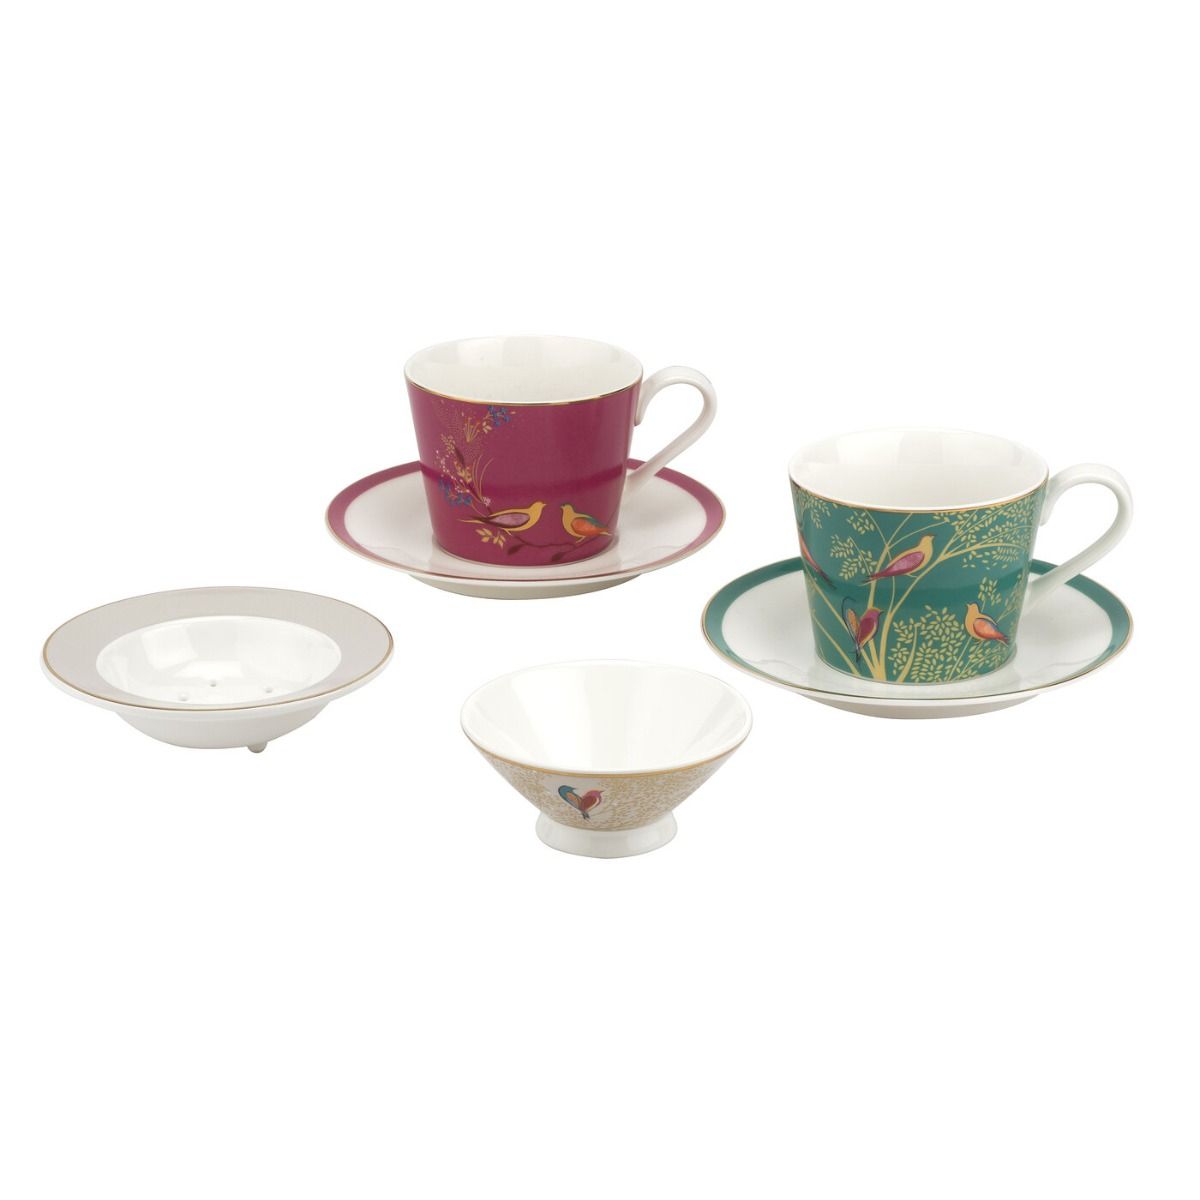 Sara Miller Chelsea Espresso Cups and Saucers